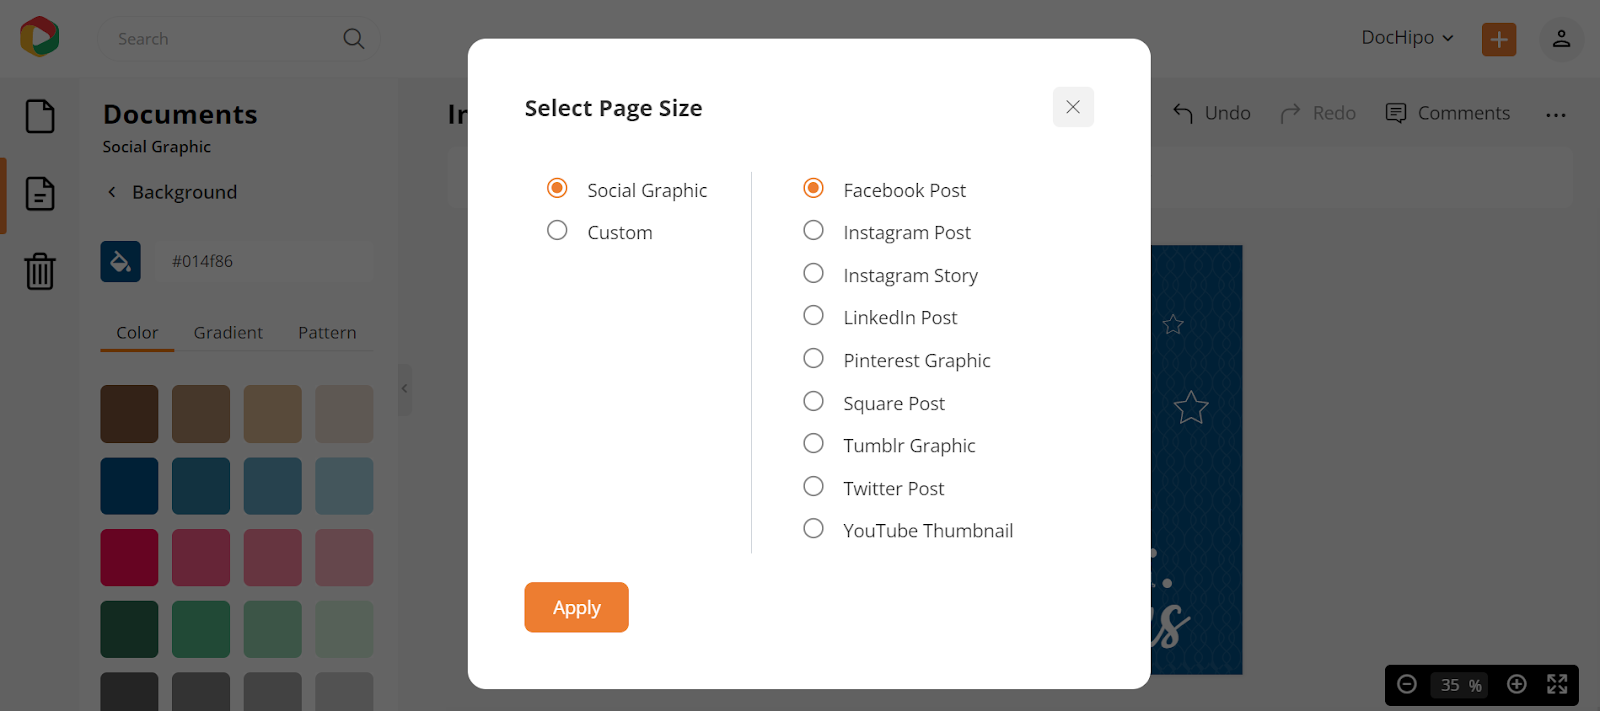 Select Page Size